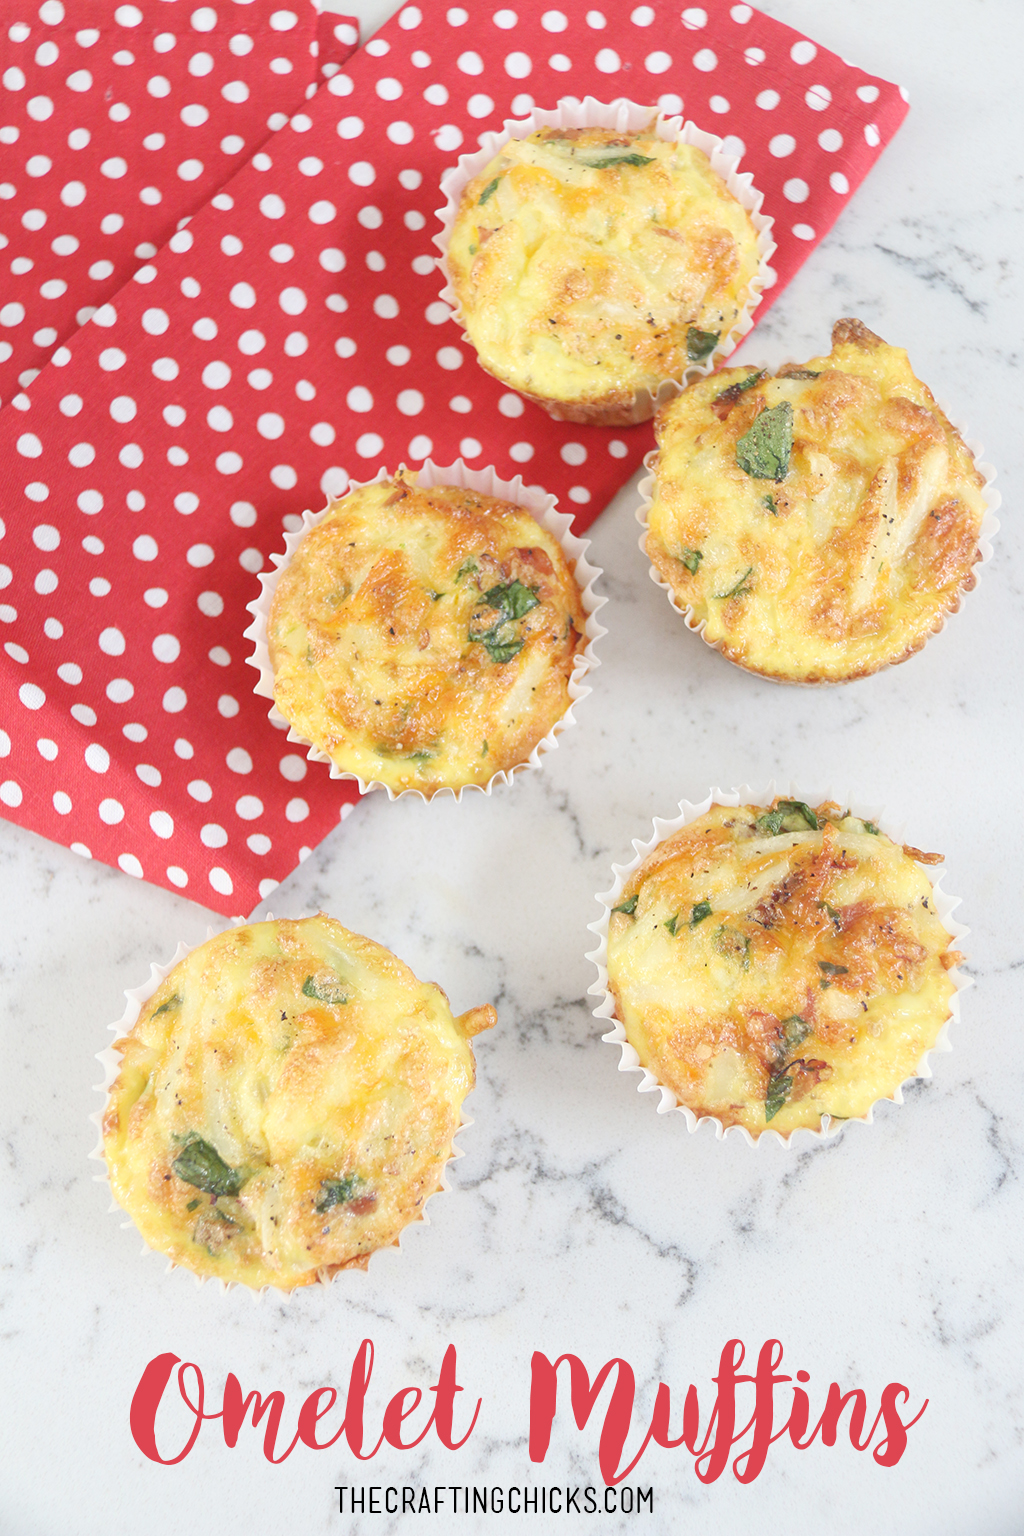 Omelet Muffins for an Easy on the Go Healthy Breakfast!